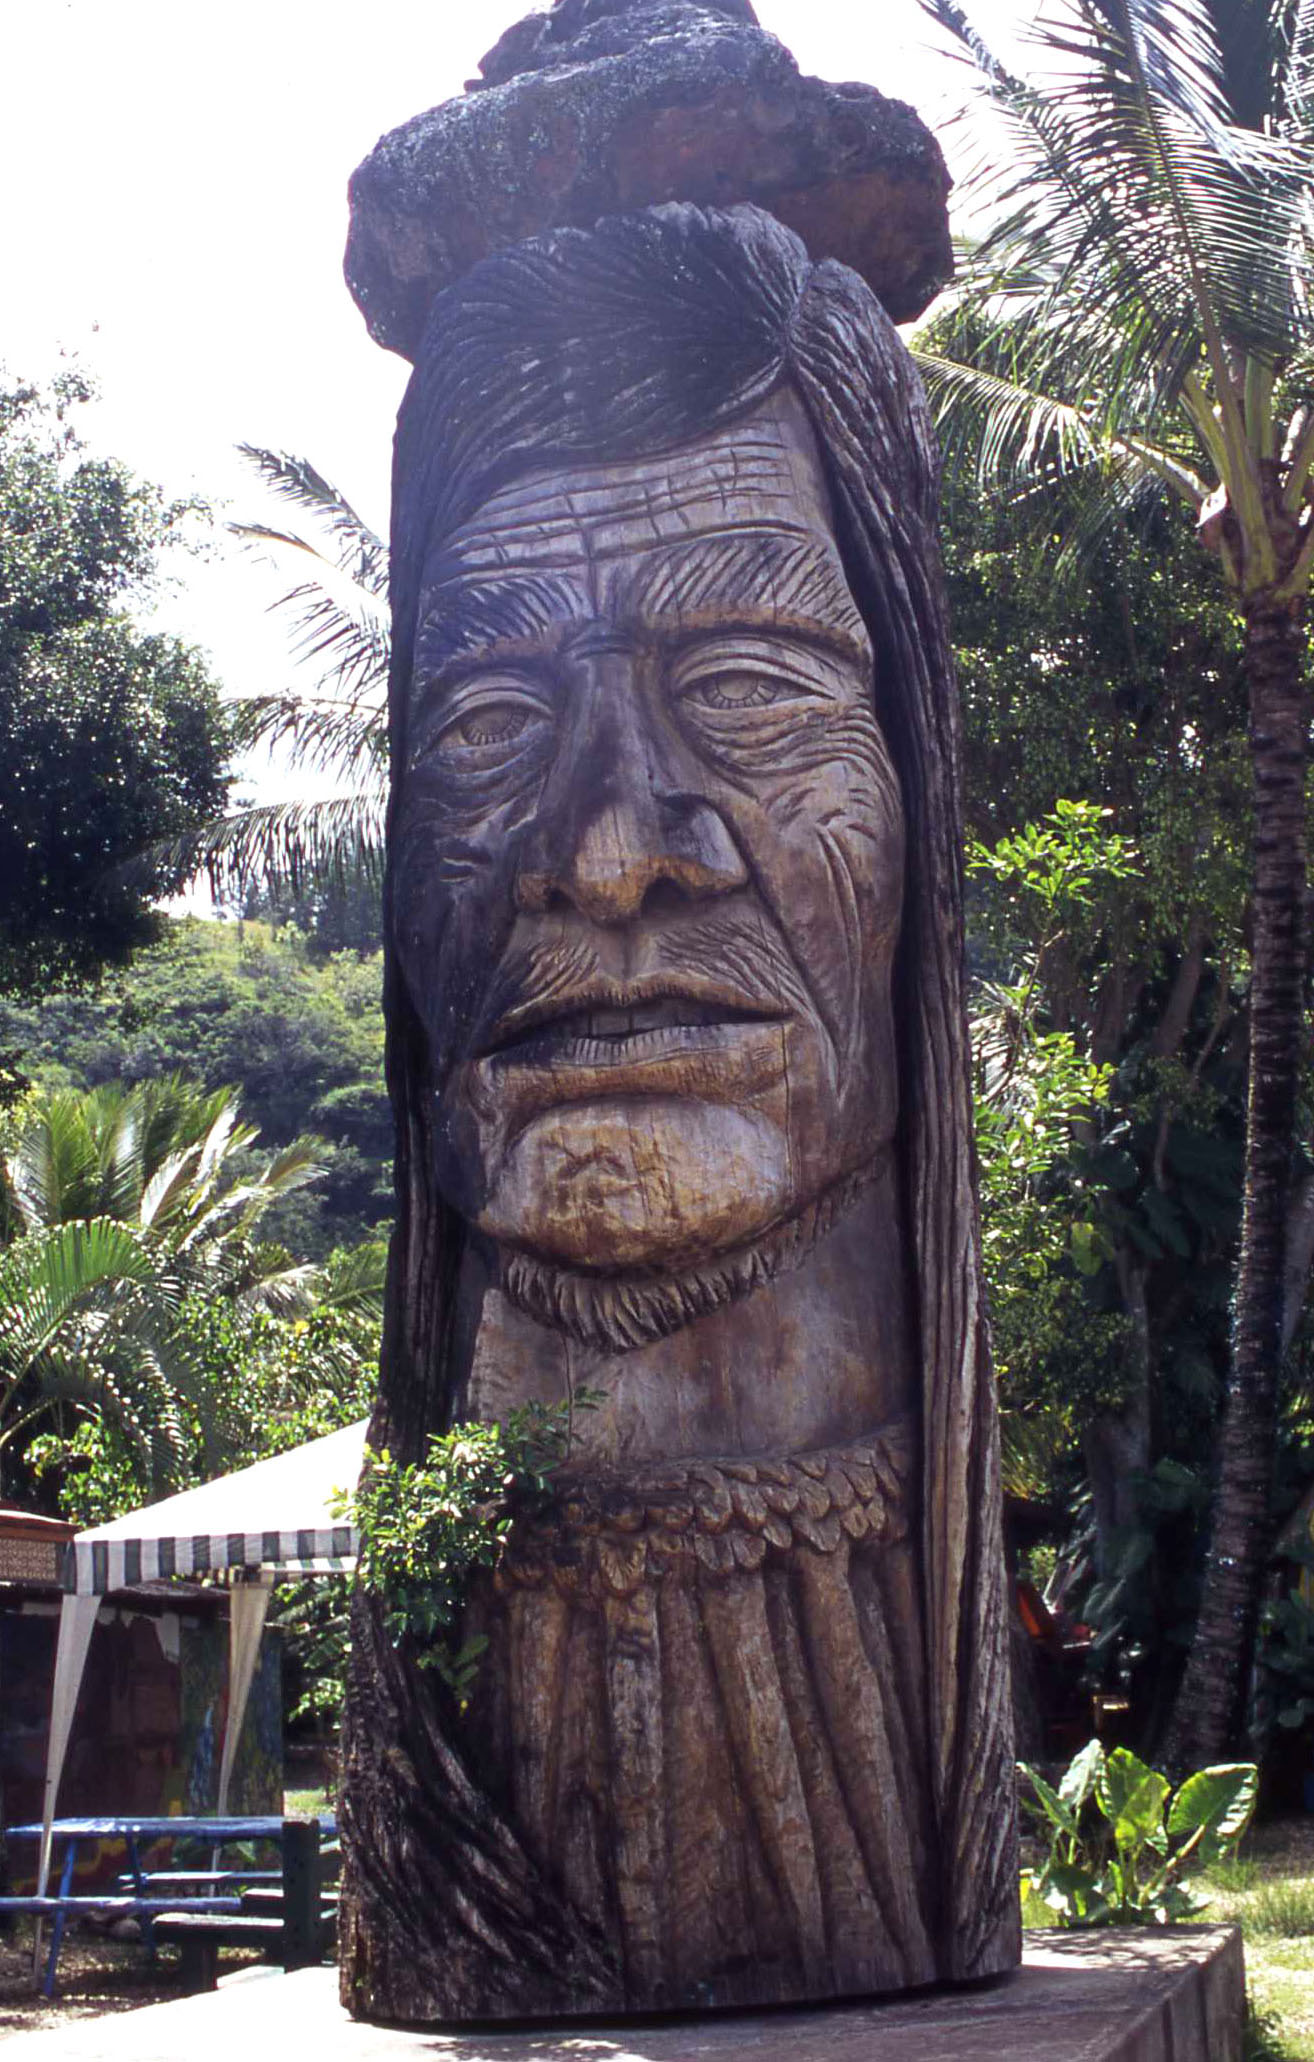 You Must Be Trippin' | Giant Indian Heads Stand Guard Across the Land